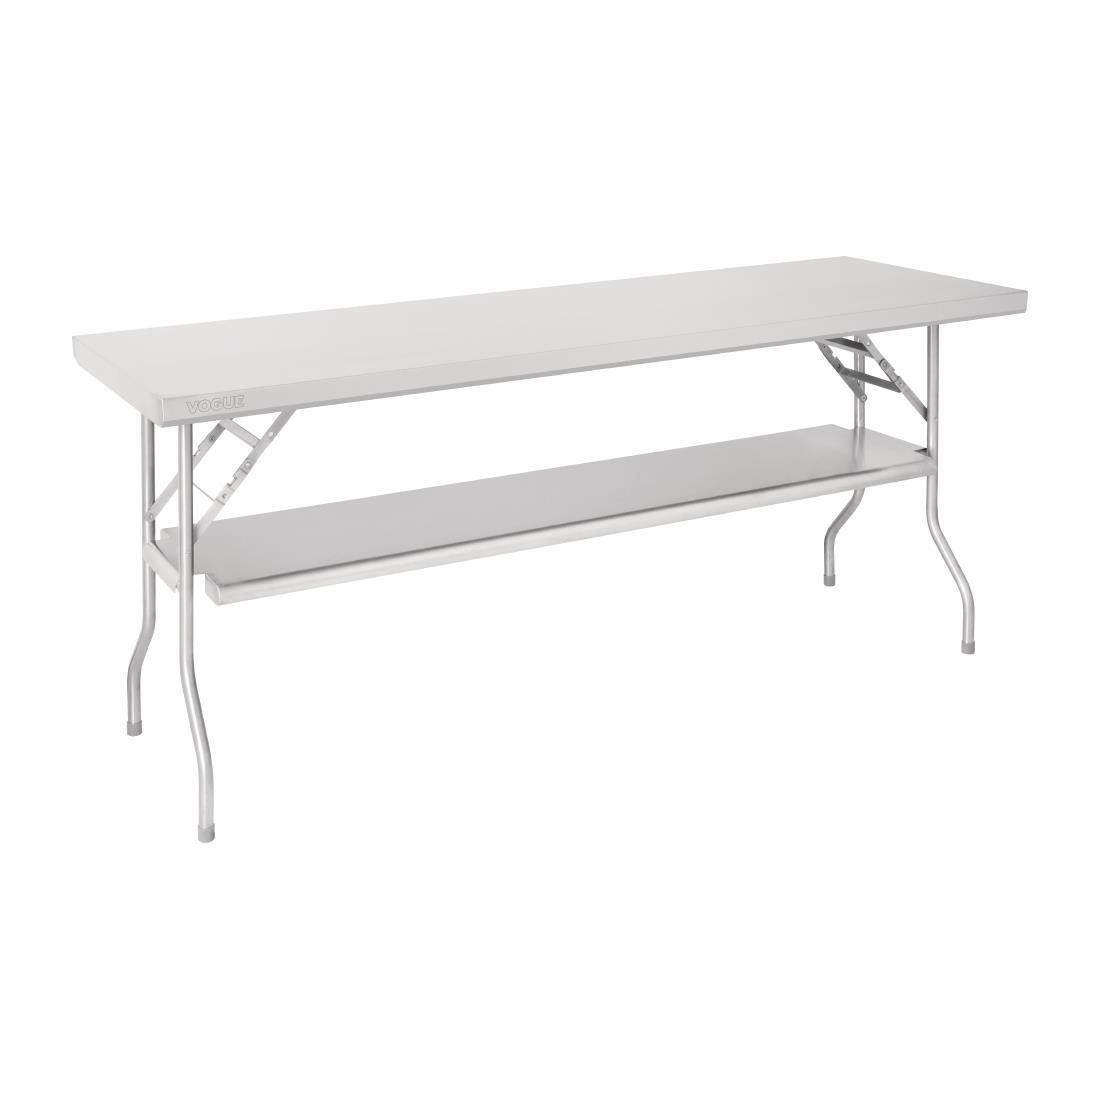 Vogue St/St Folding Work Table 1830x610x780 - FN289  - 3